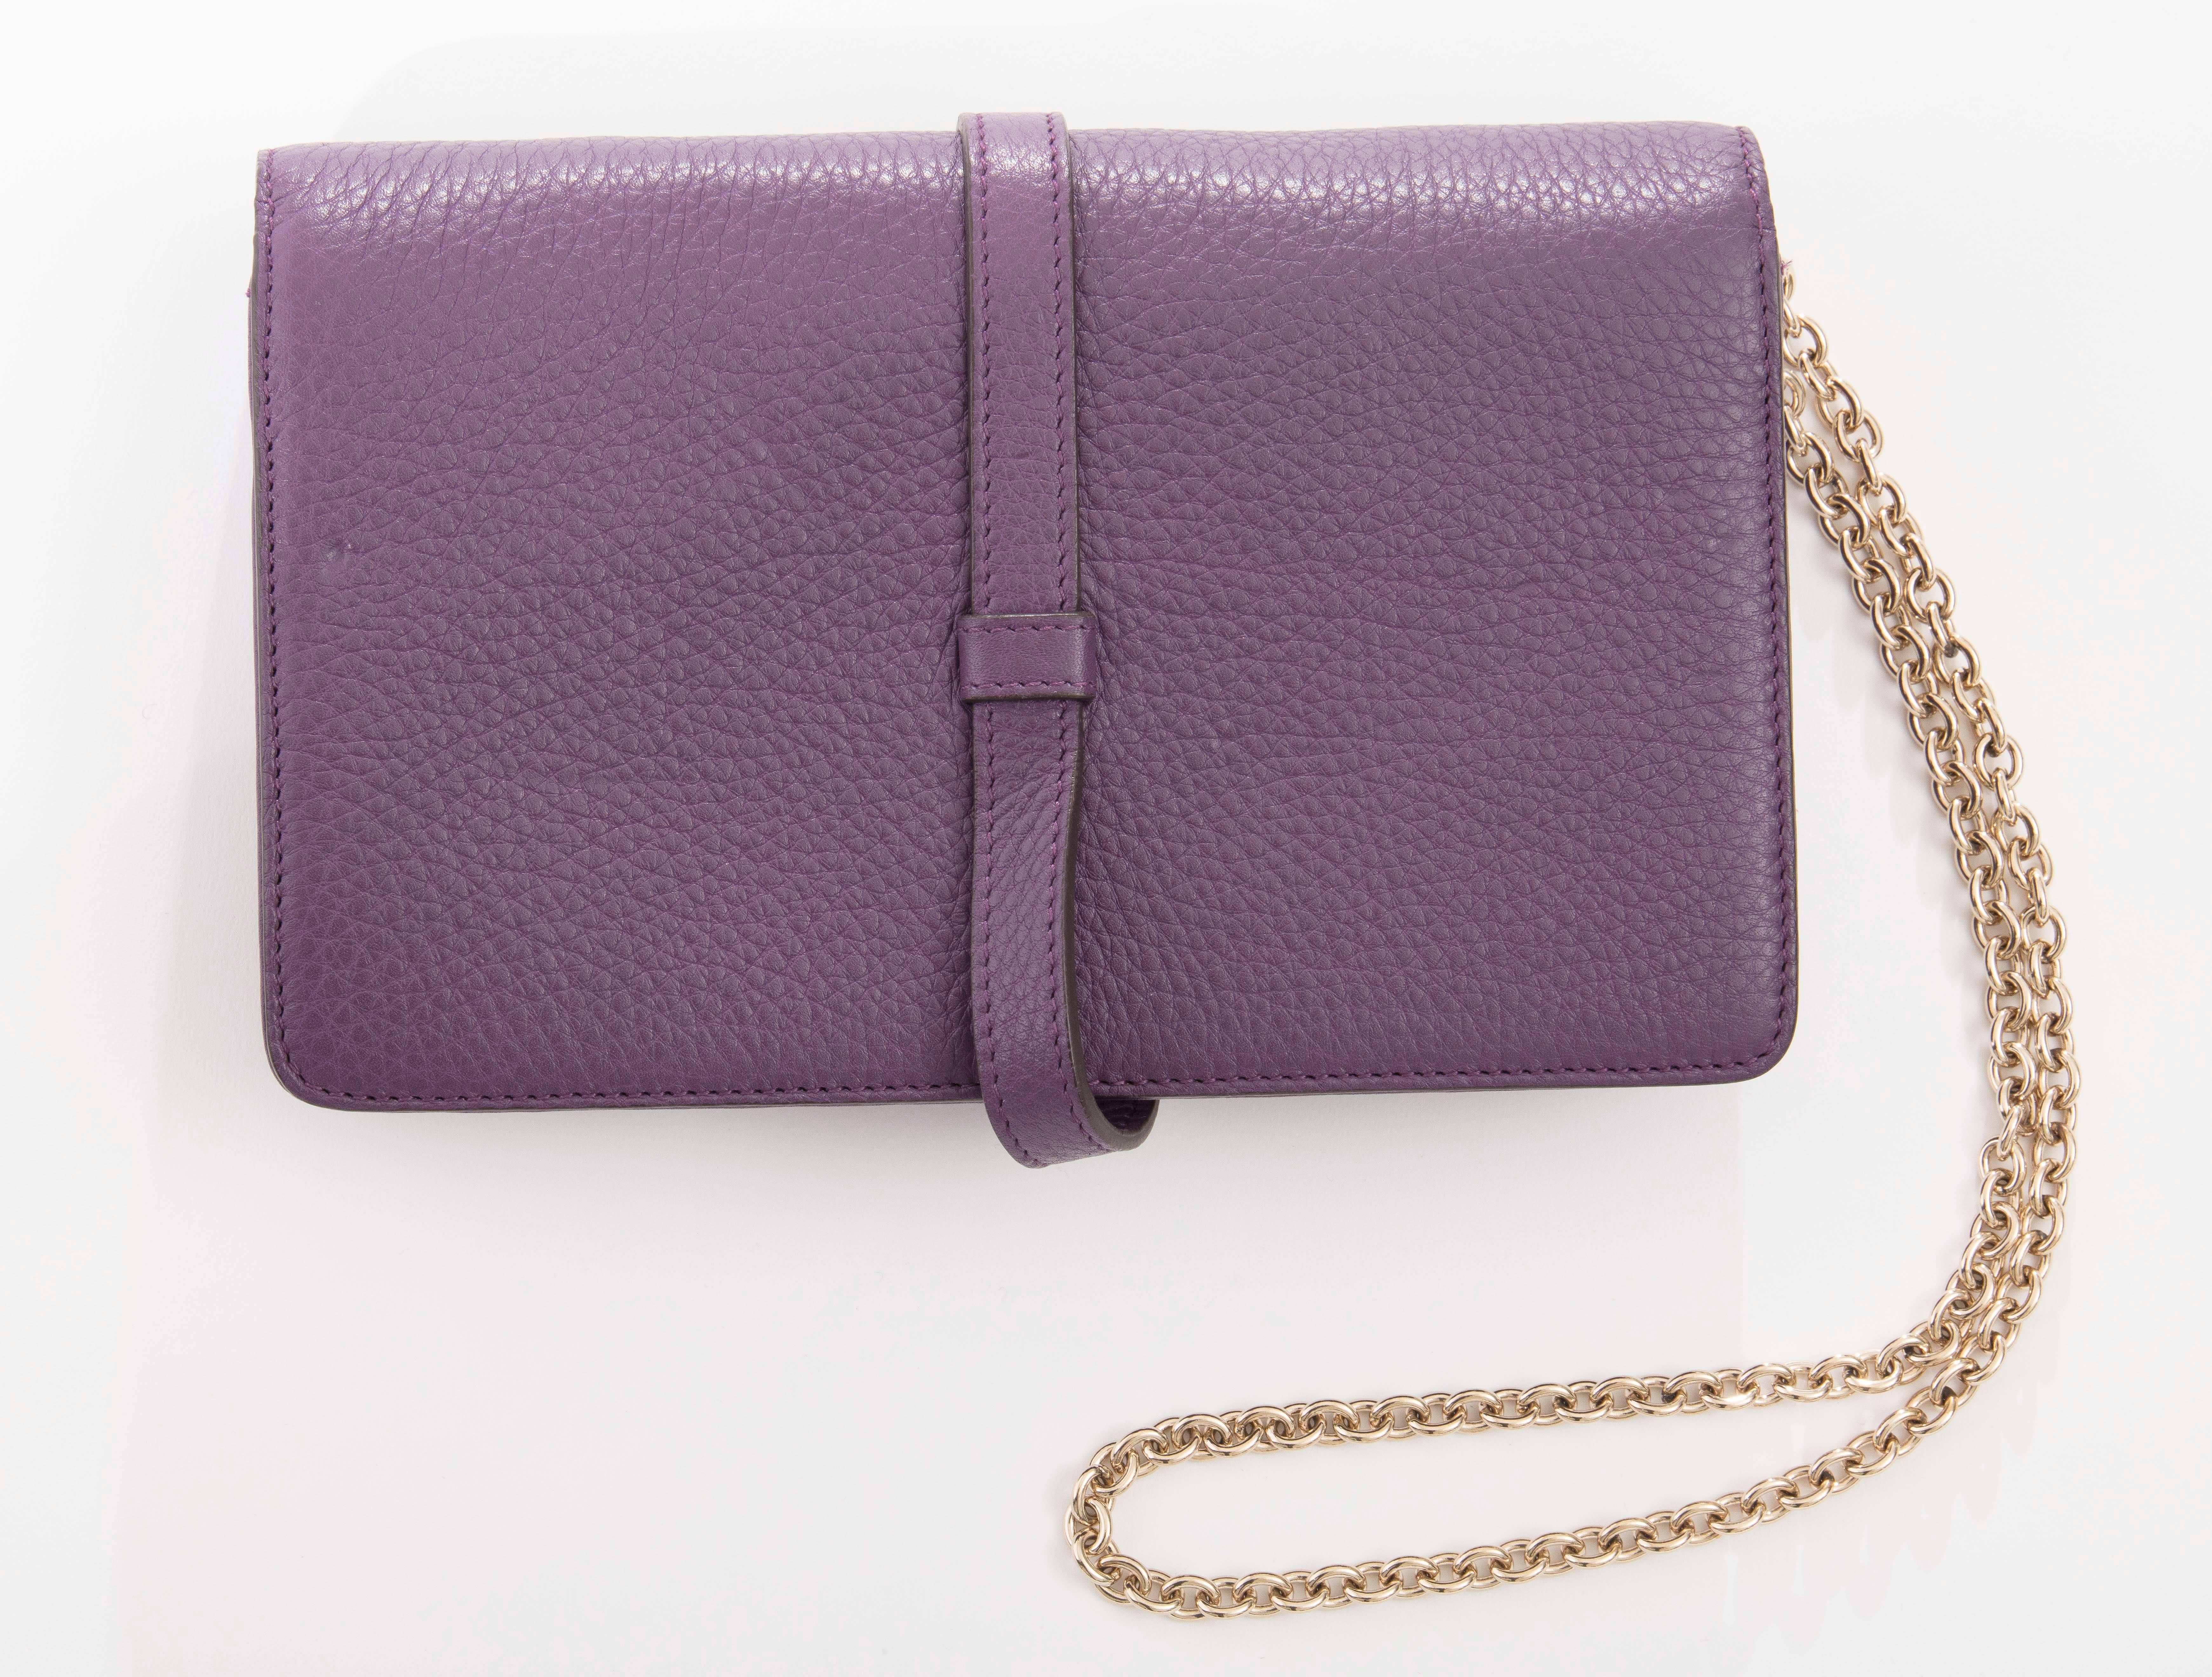 Gucci amethyst leather wallet on chain shoulder bag with gold Jackie piston lock, two zipped compartments and an open slide area with six card slots and detachable chain shoulder strap.

Retail: 1200

Width 8.5, Height 5, Depth 1.5